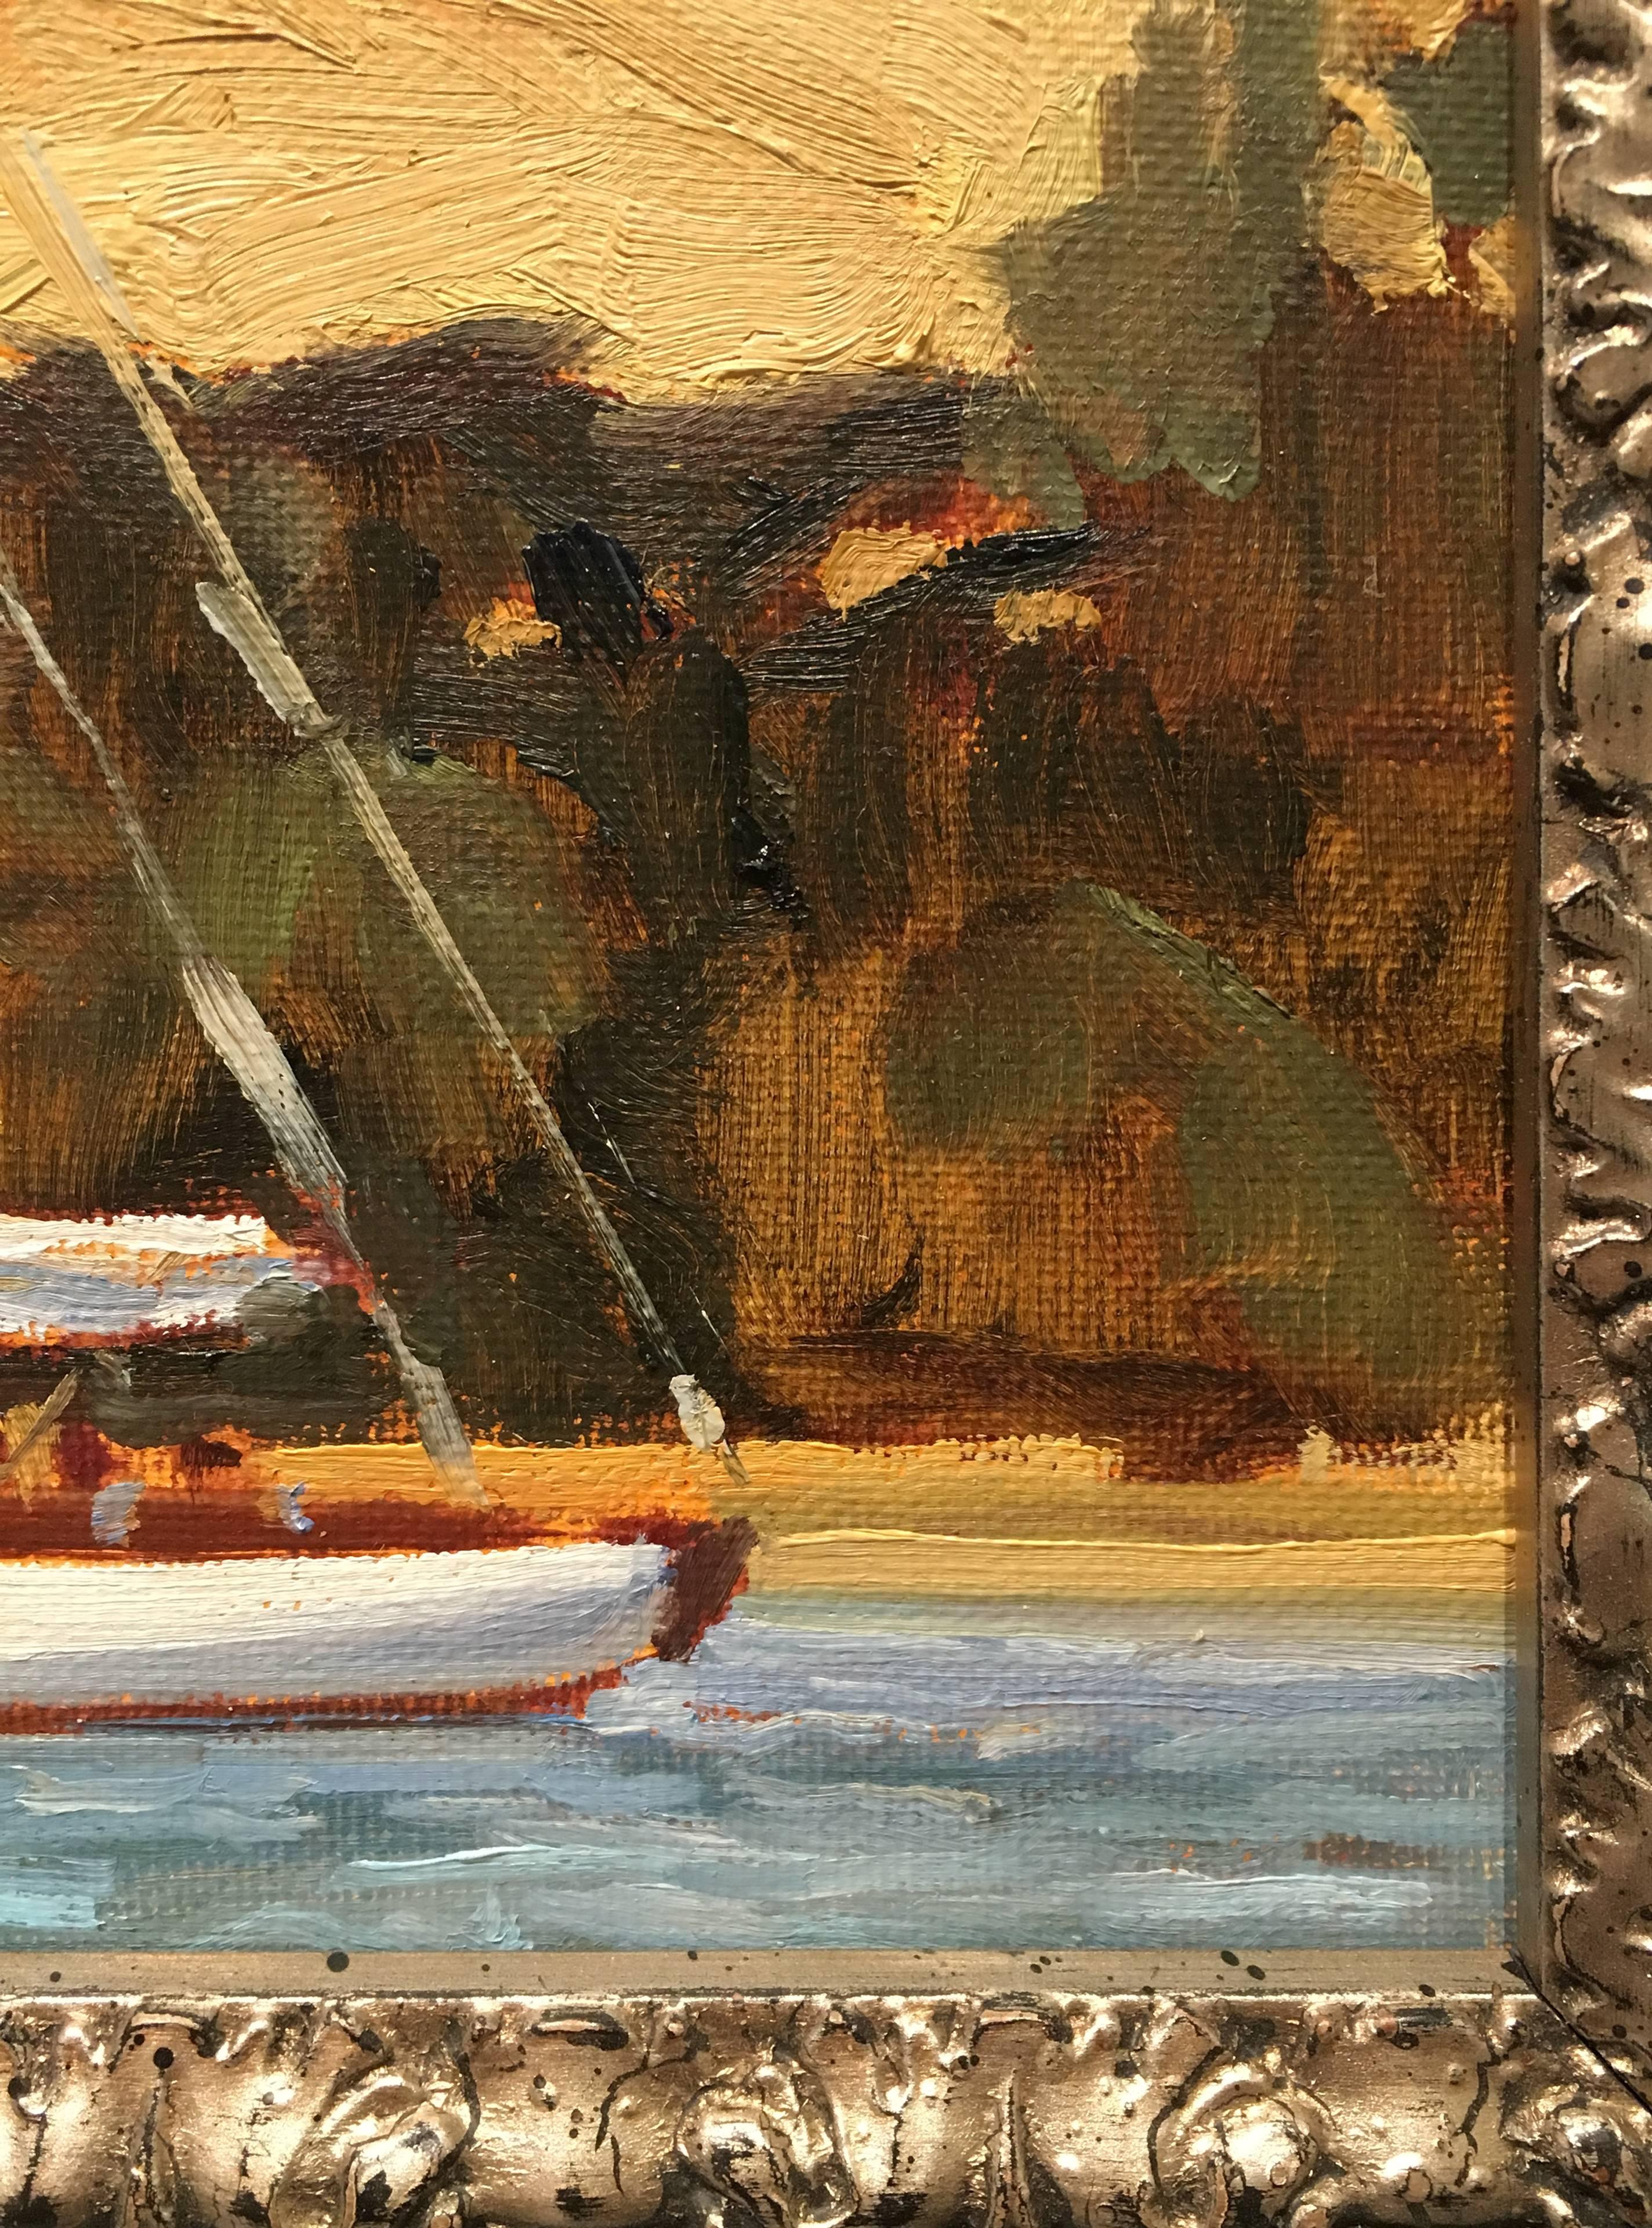 Sloop at Anchor, Tomales Bay, West Marin - Black Landscape Painting by Dennis Ziemienski